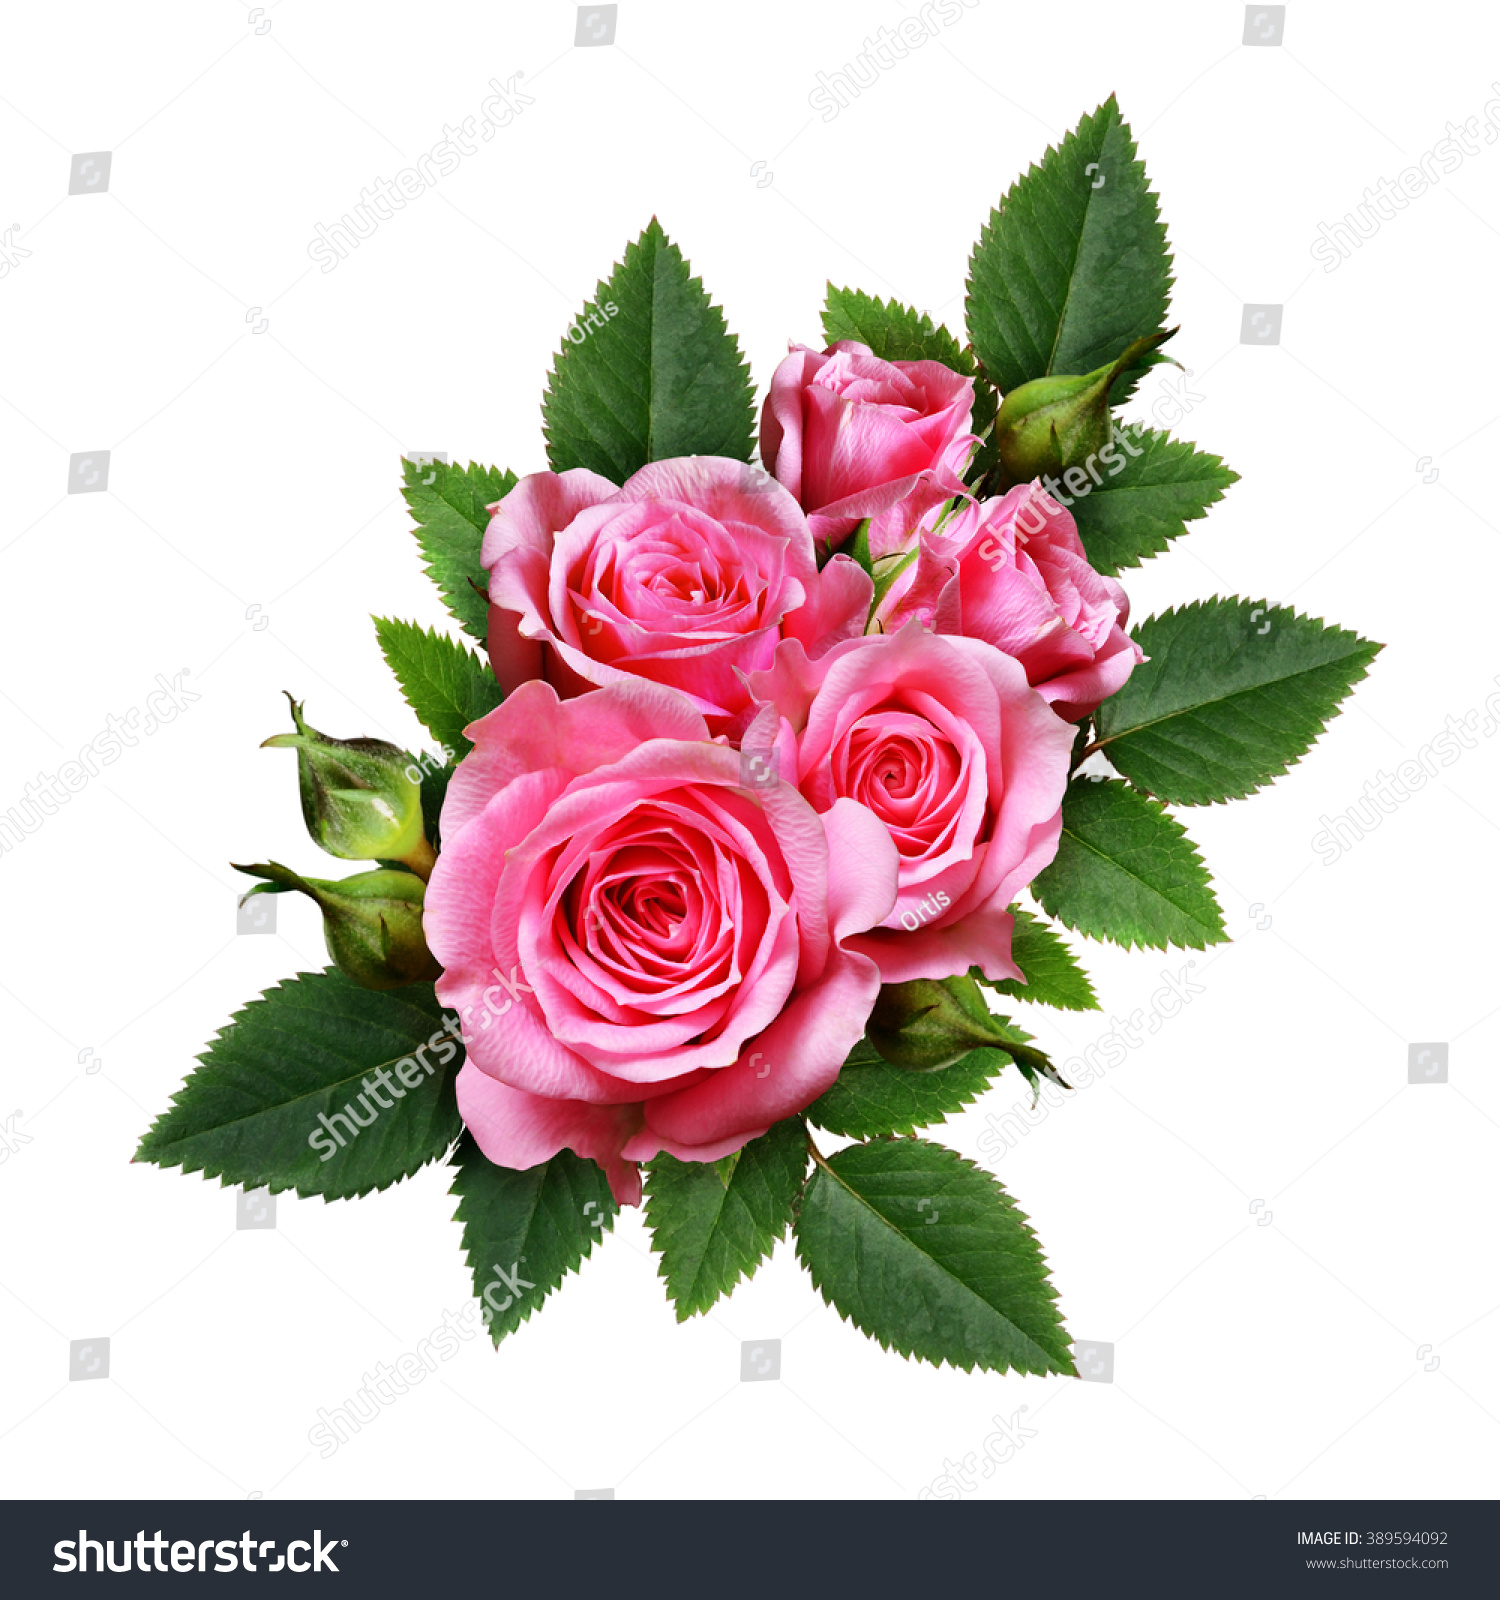 Pink Rose Flowers Composition Isolated On Stock Photo 389594092